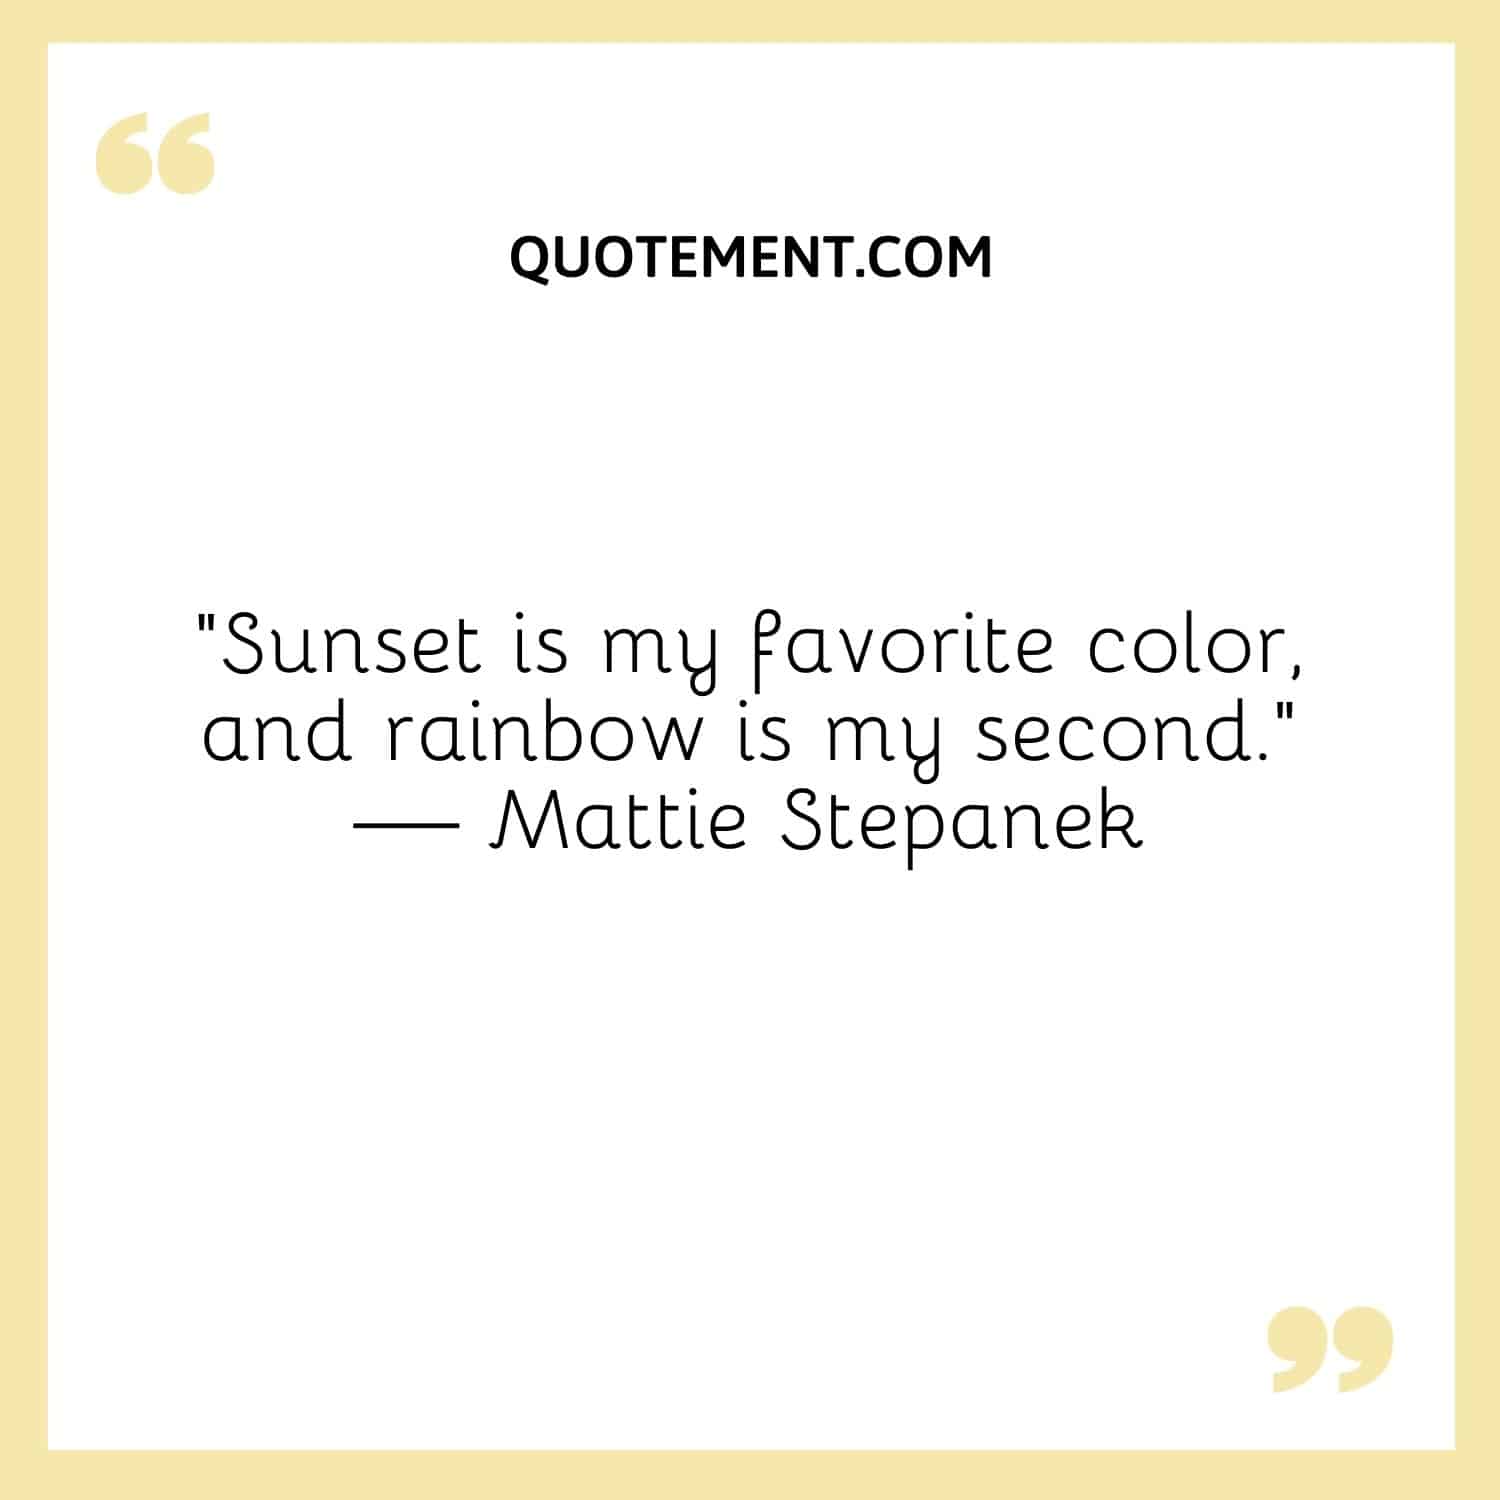 Sunset is my favorite color, and rainbow is my second